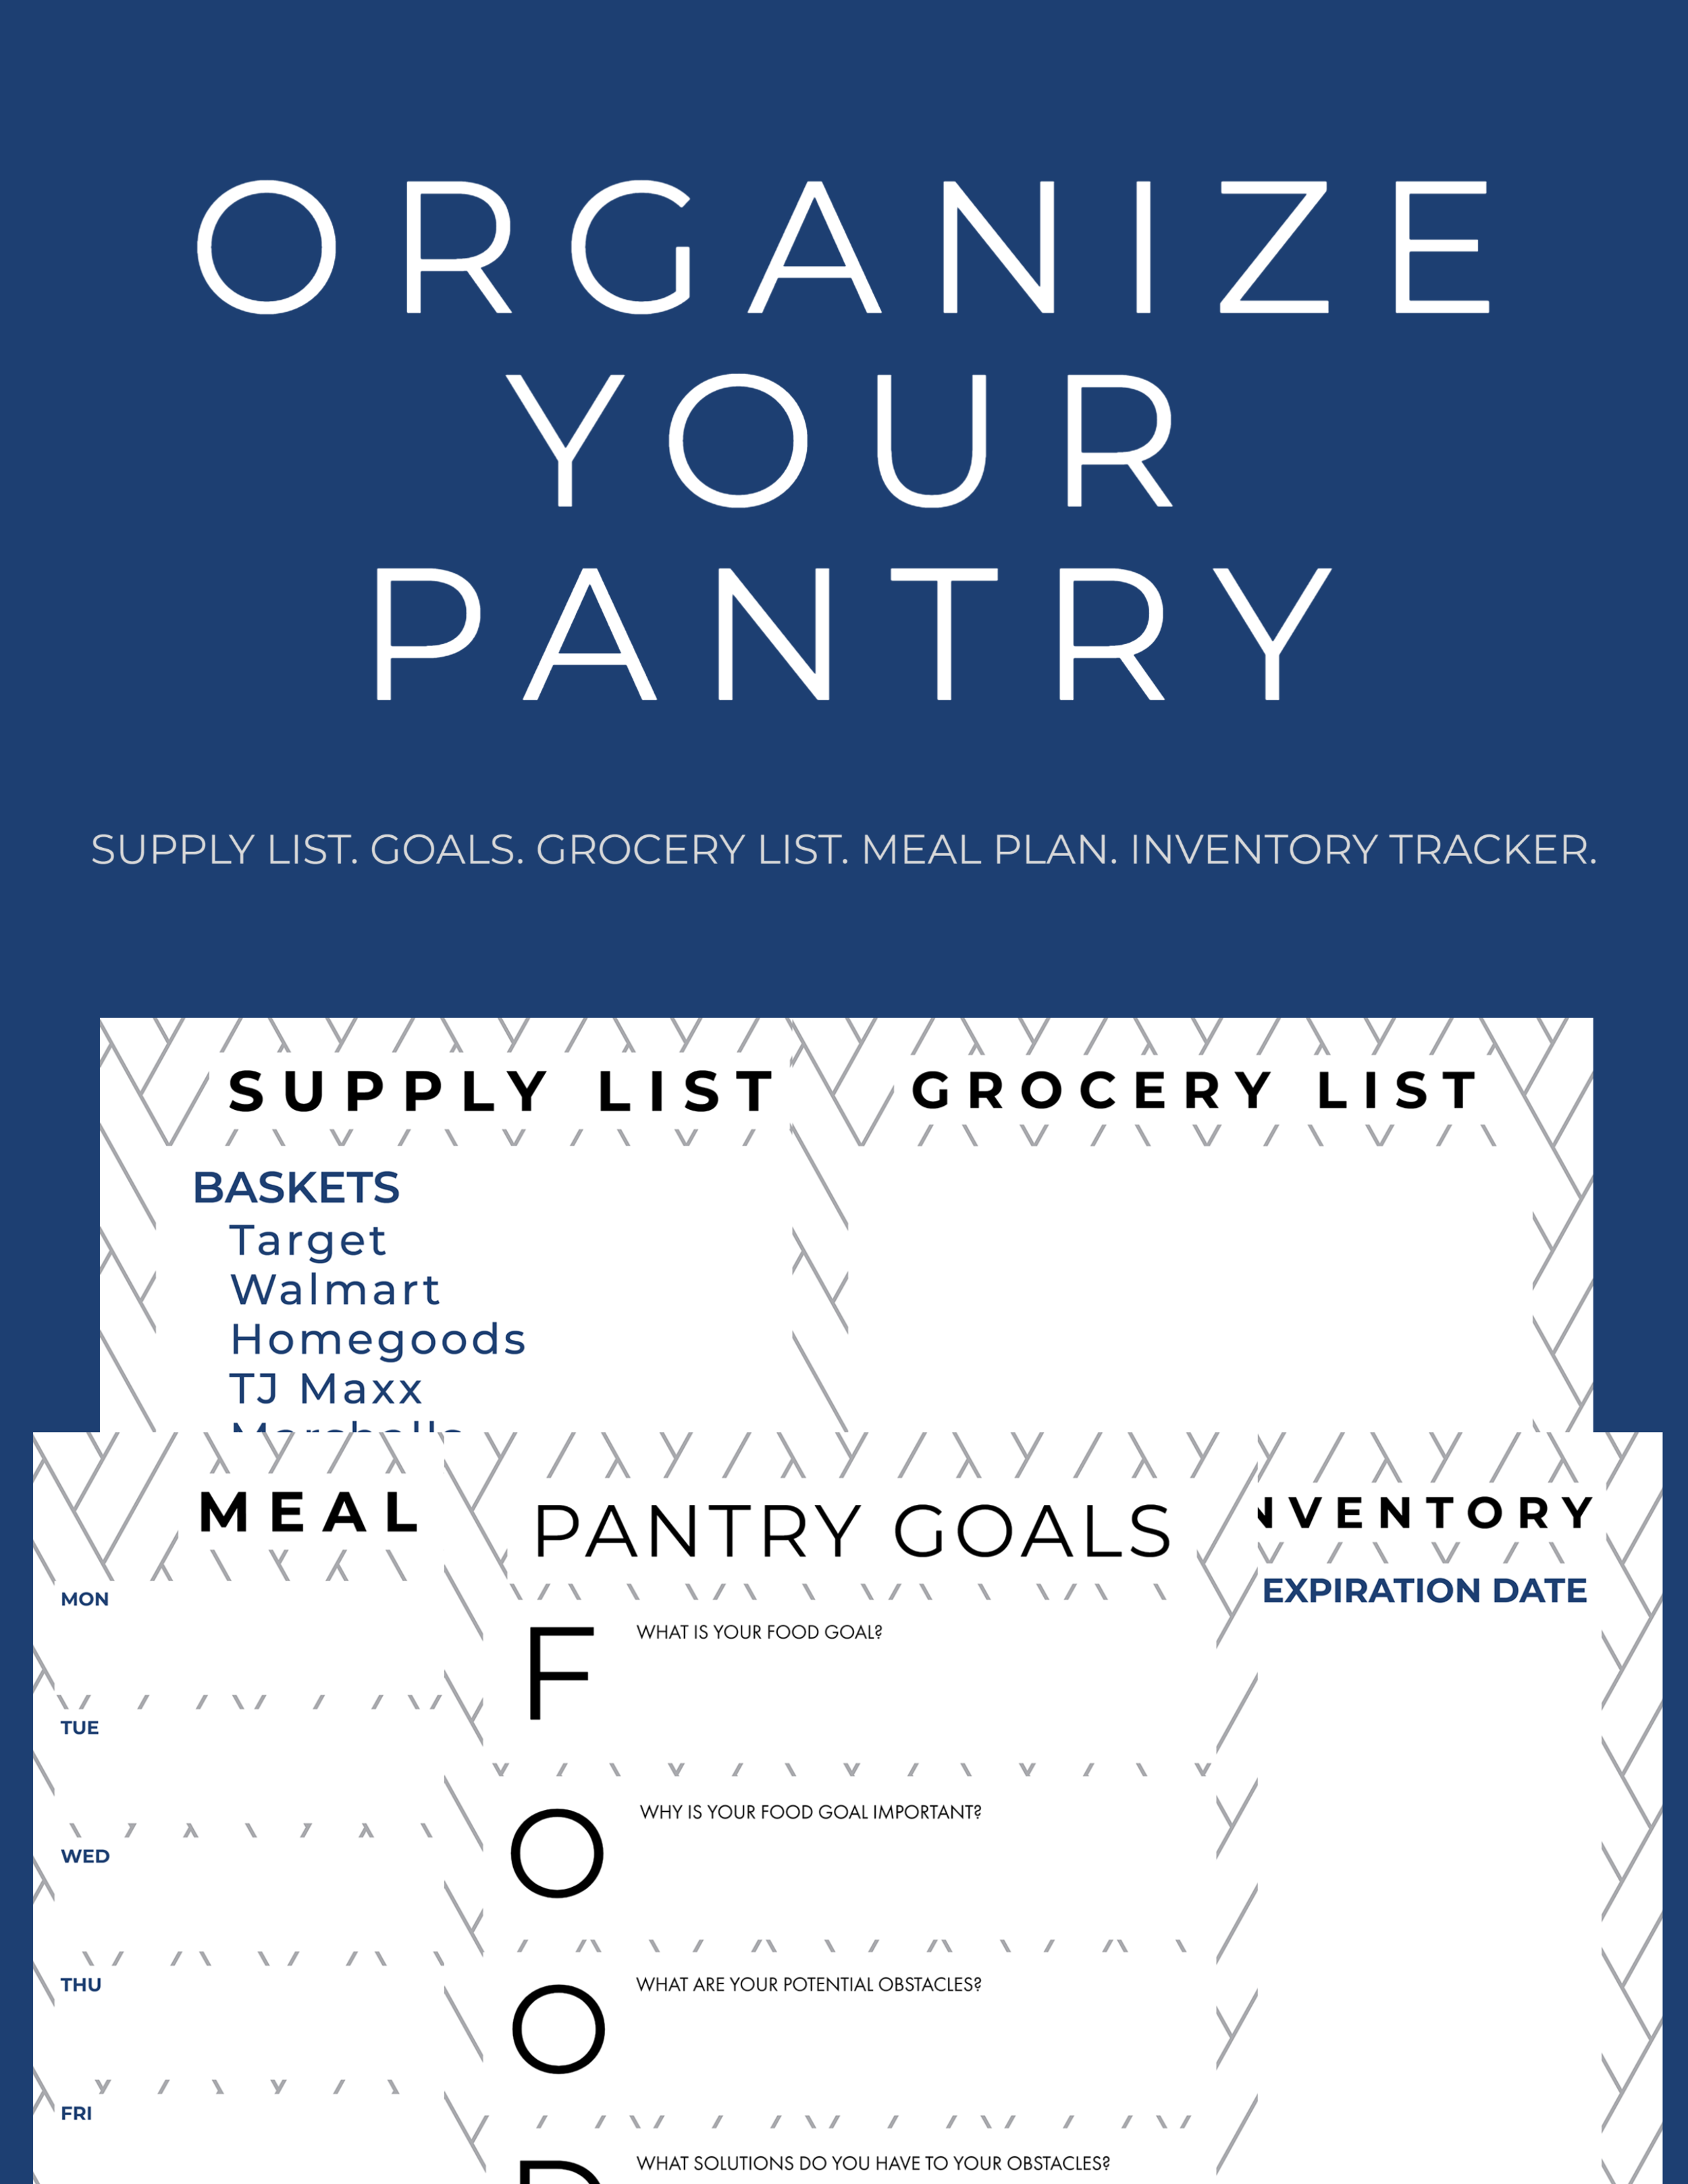 supply list. goals. grocery list. meal plan. inventory tracker